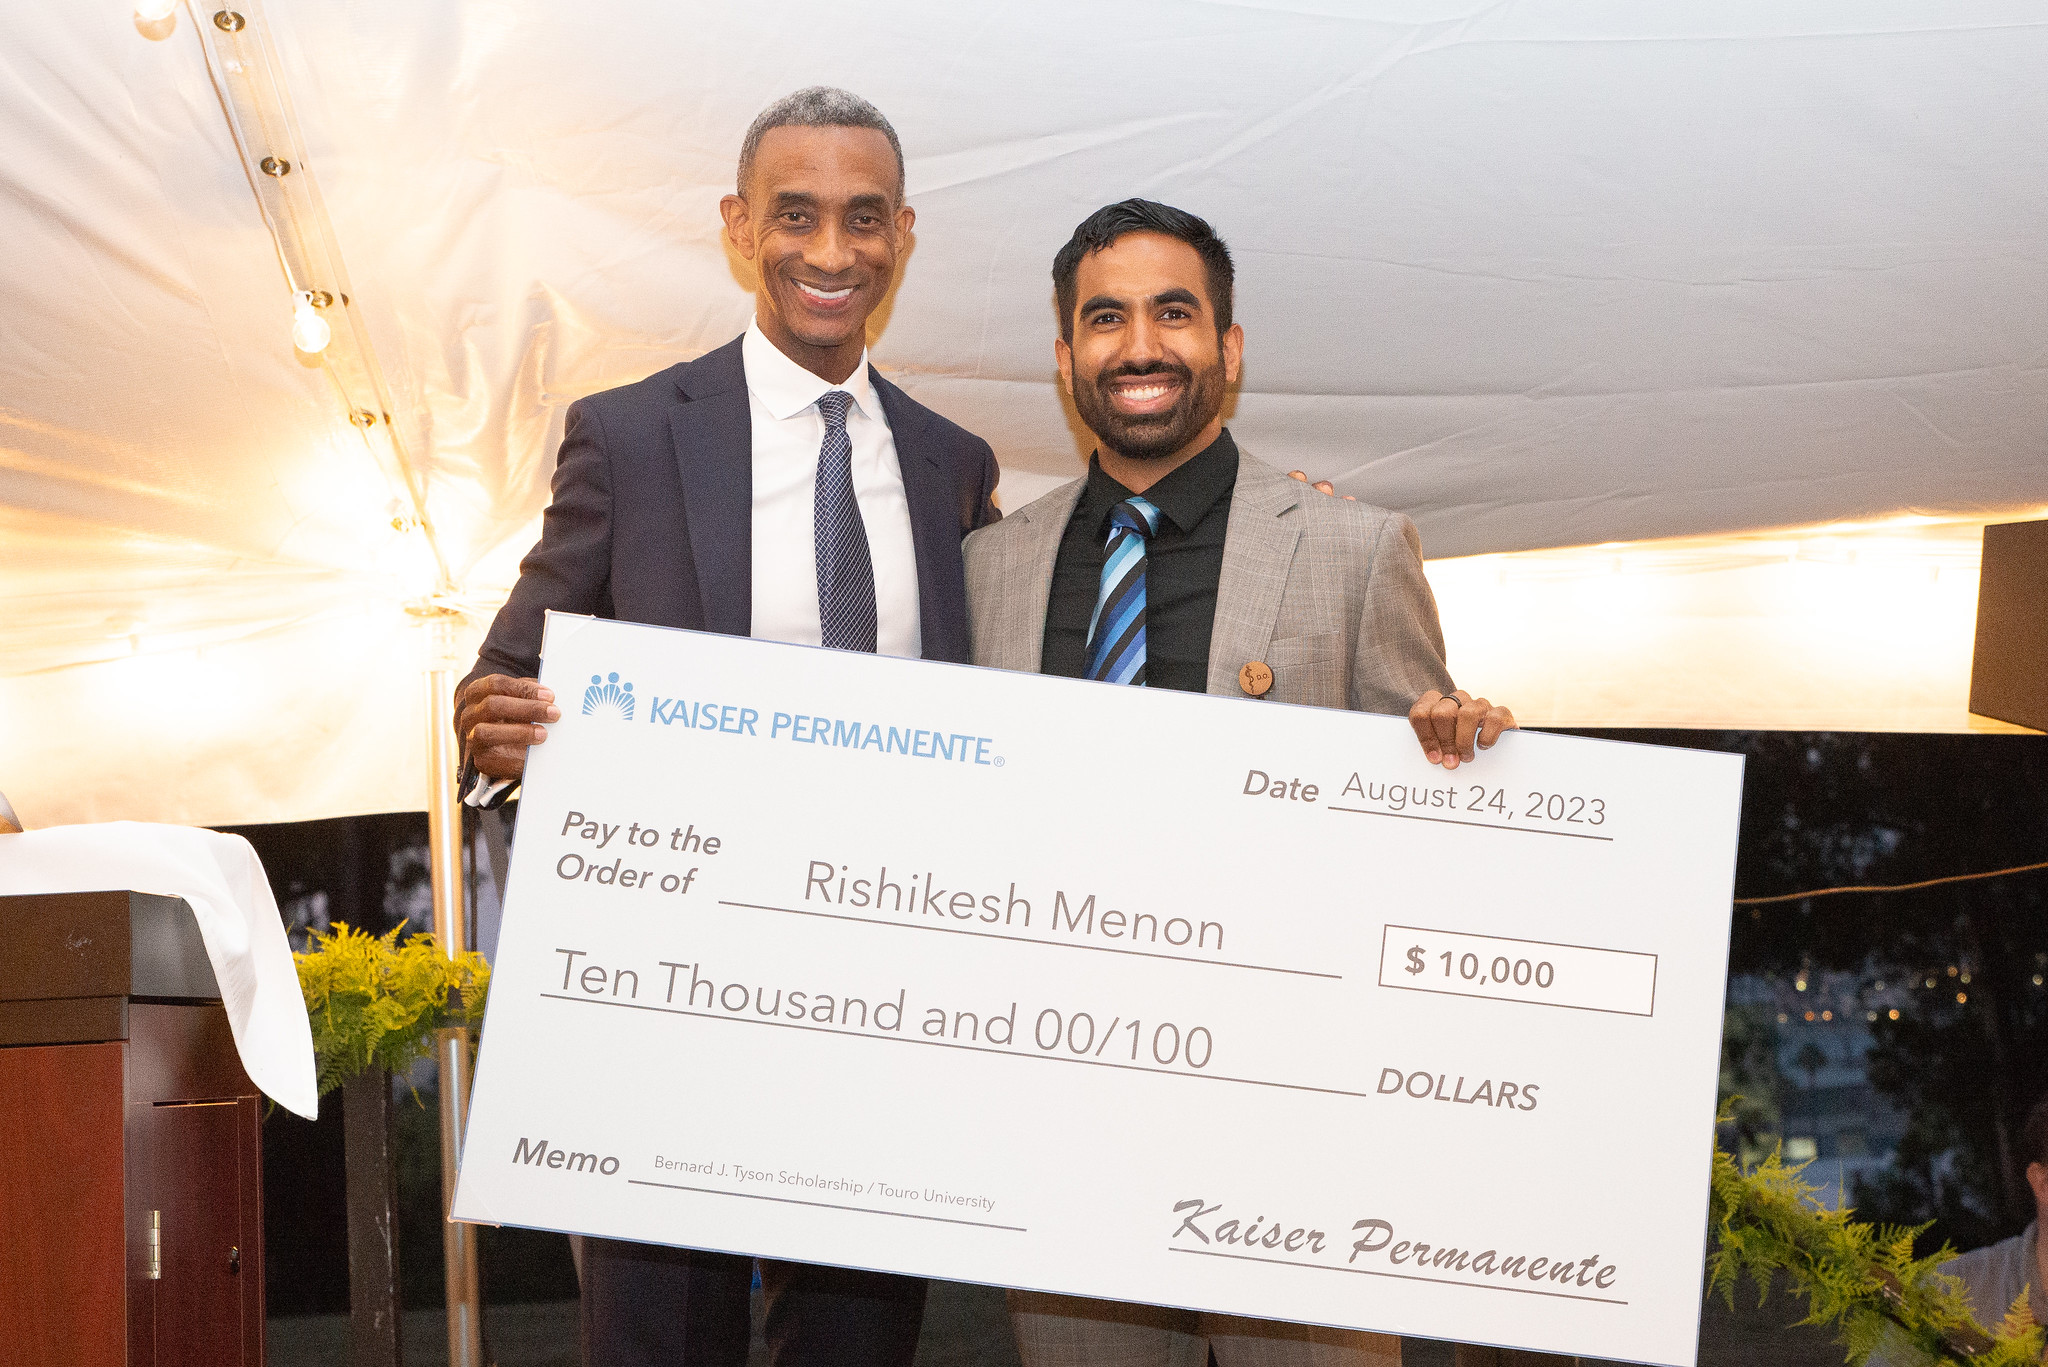 Darryl Curry standing next to Rishikesh Menon holding a giant check for $10,000